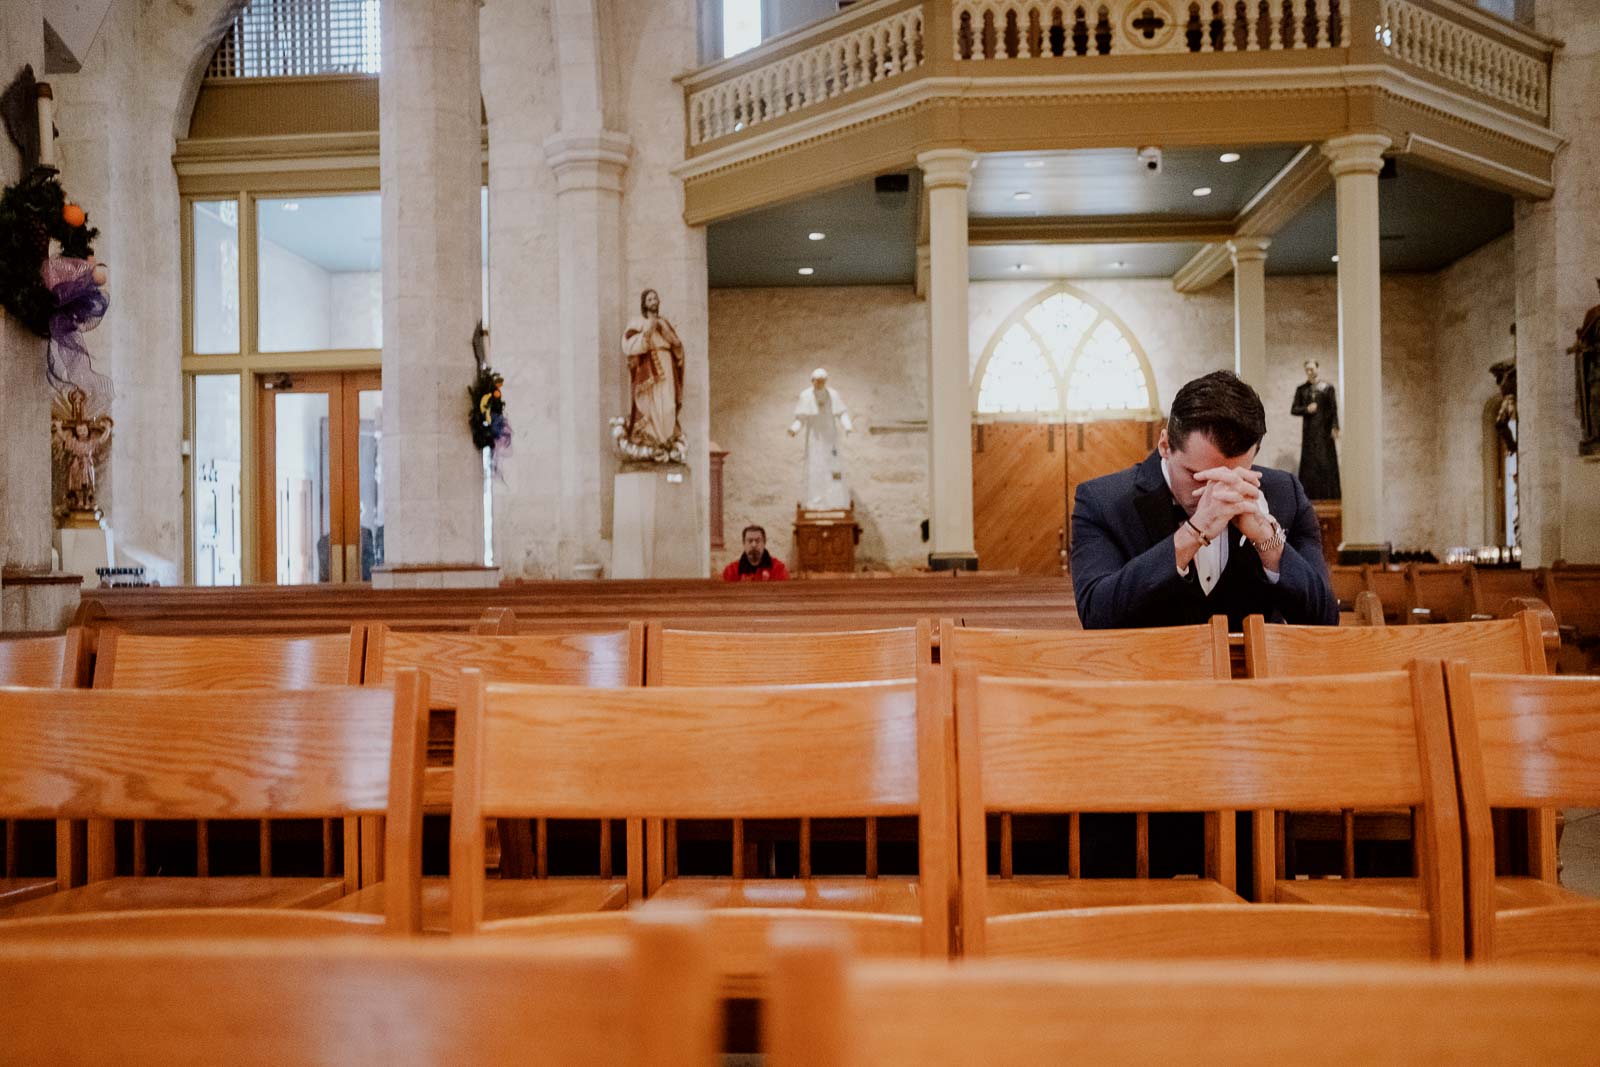 The groom kneeling prays before the wedding ceremony at San Fernando Cathedral